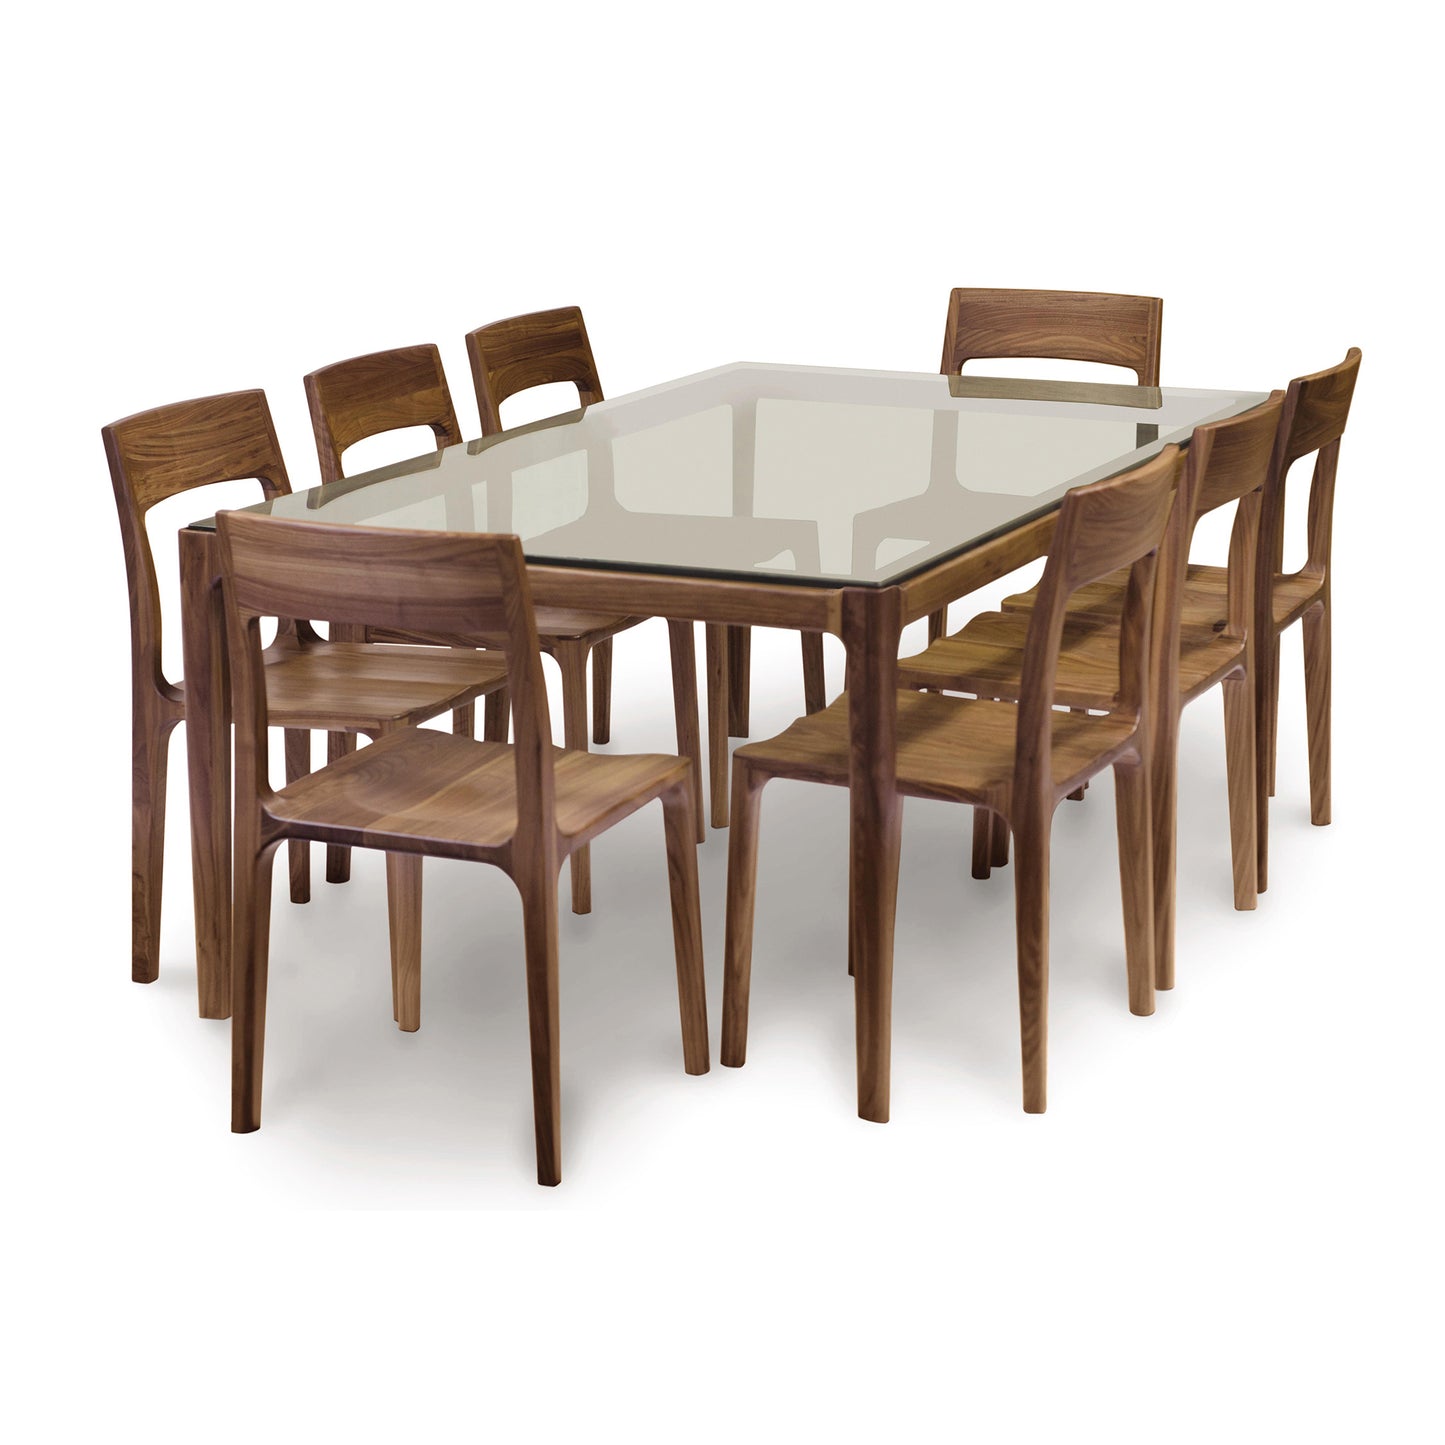 This sleek and stylish Lisse Glass Top Dining Table features a Copeland Furniture Walnut Glass Top, creating a modern and minimalist design. Crafted with natural walnut, it includes six comfortable chairs for the perfect dining experience.